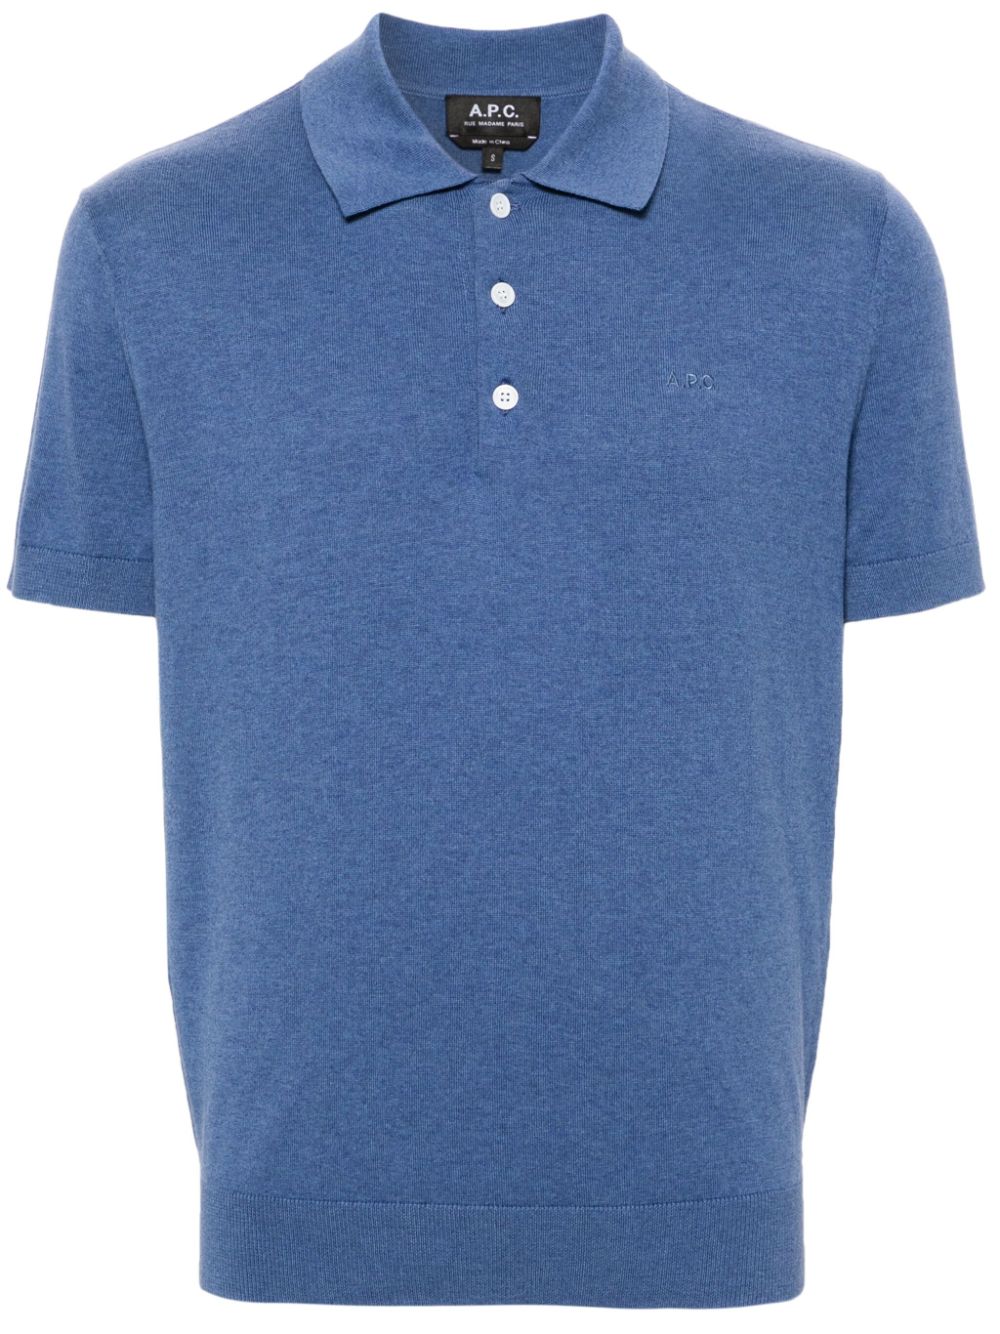 A.P.C. Gregory knitted polo shirt - Blue von A.P.C.